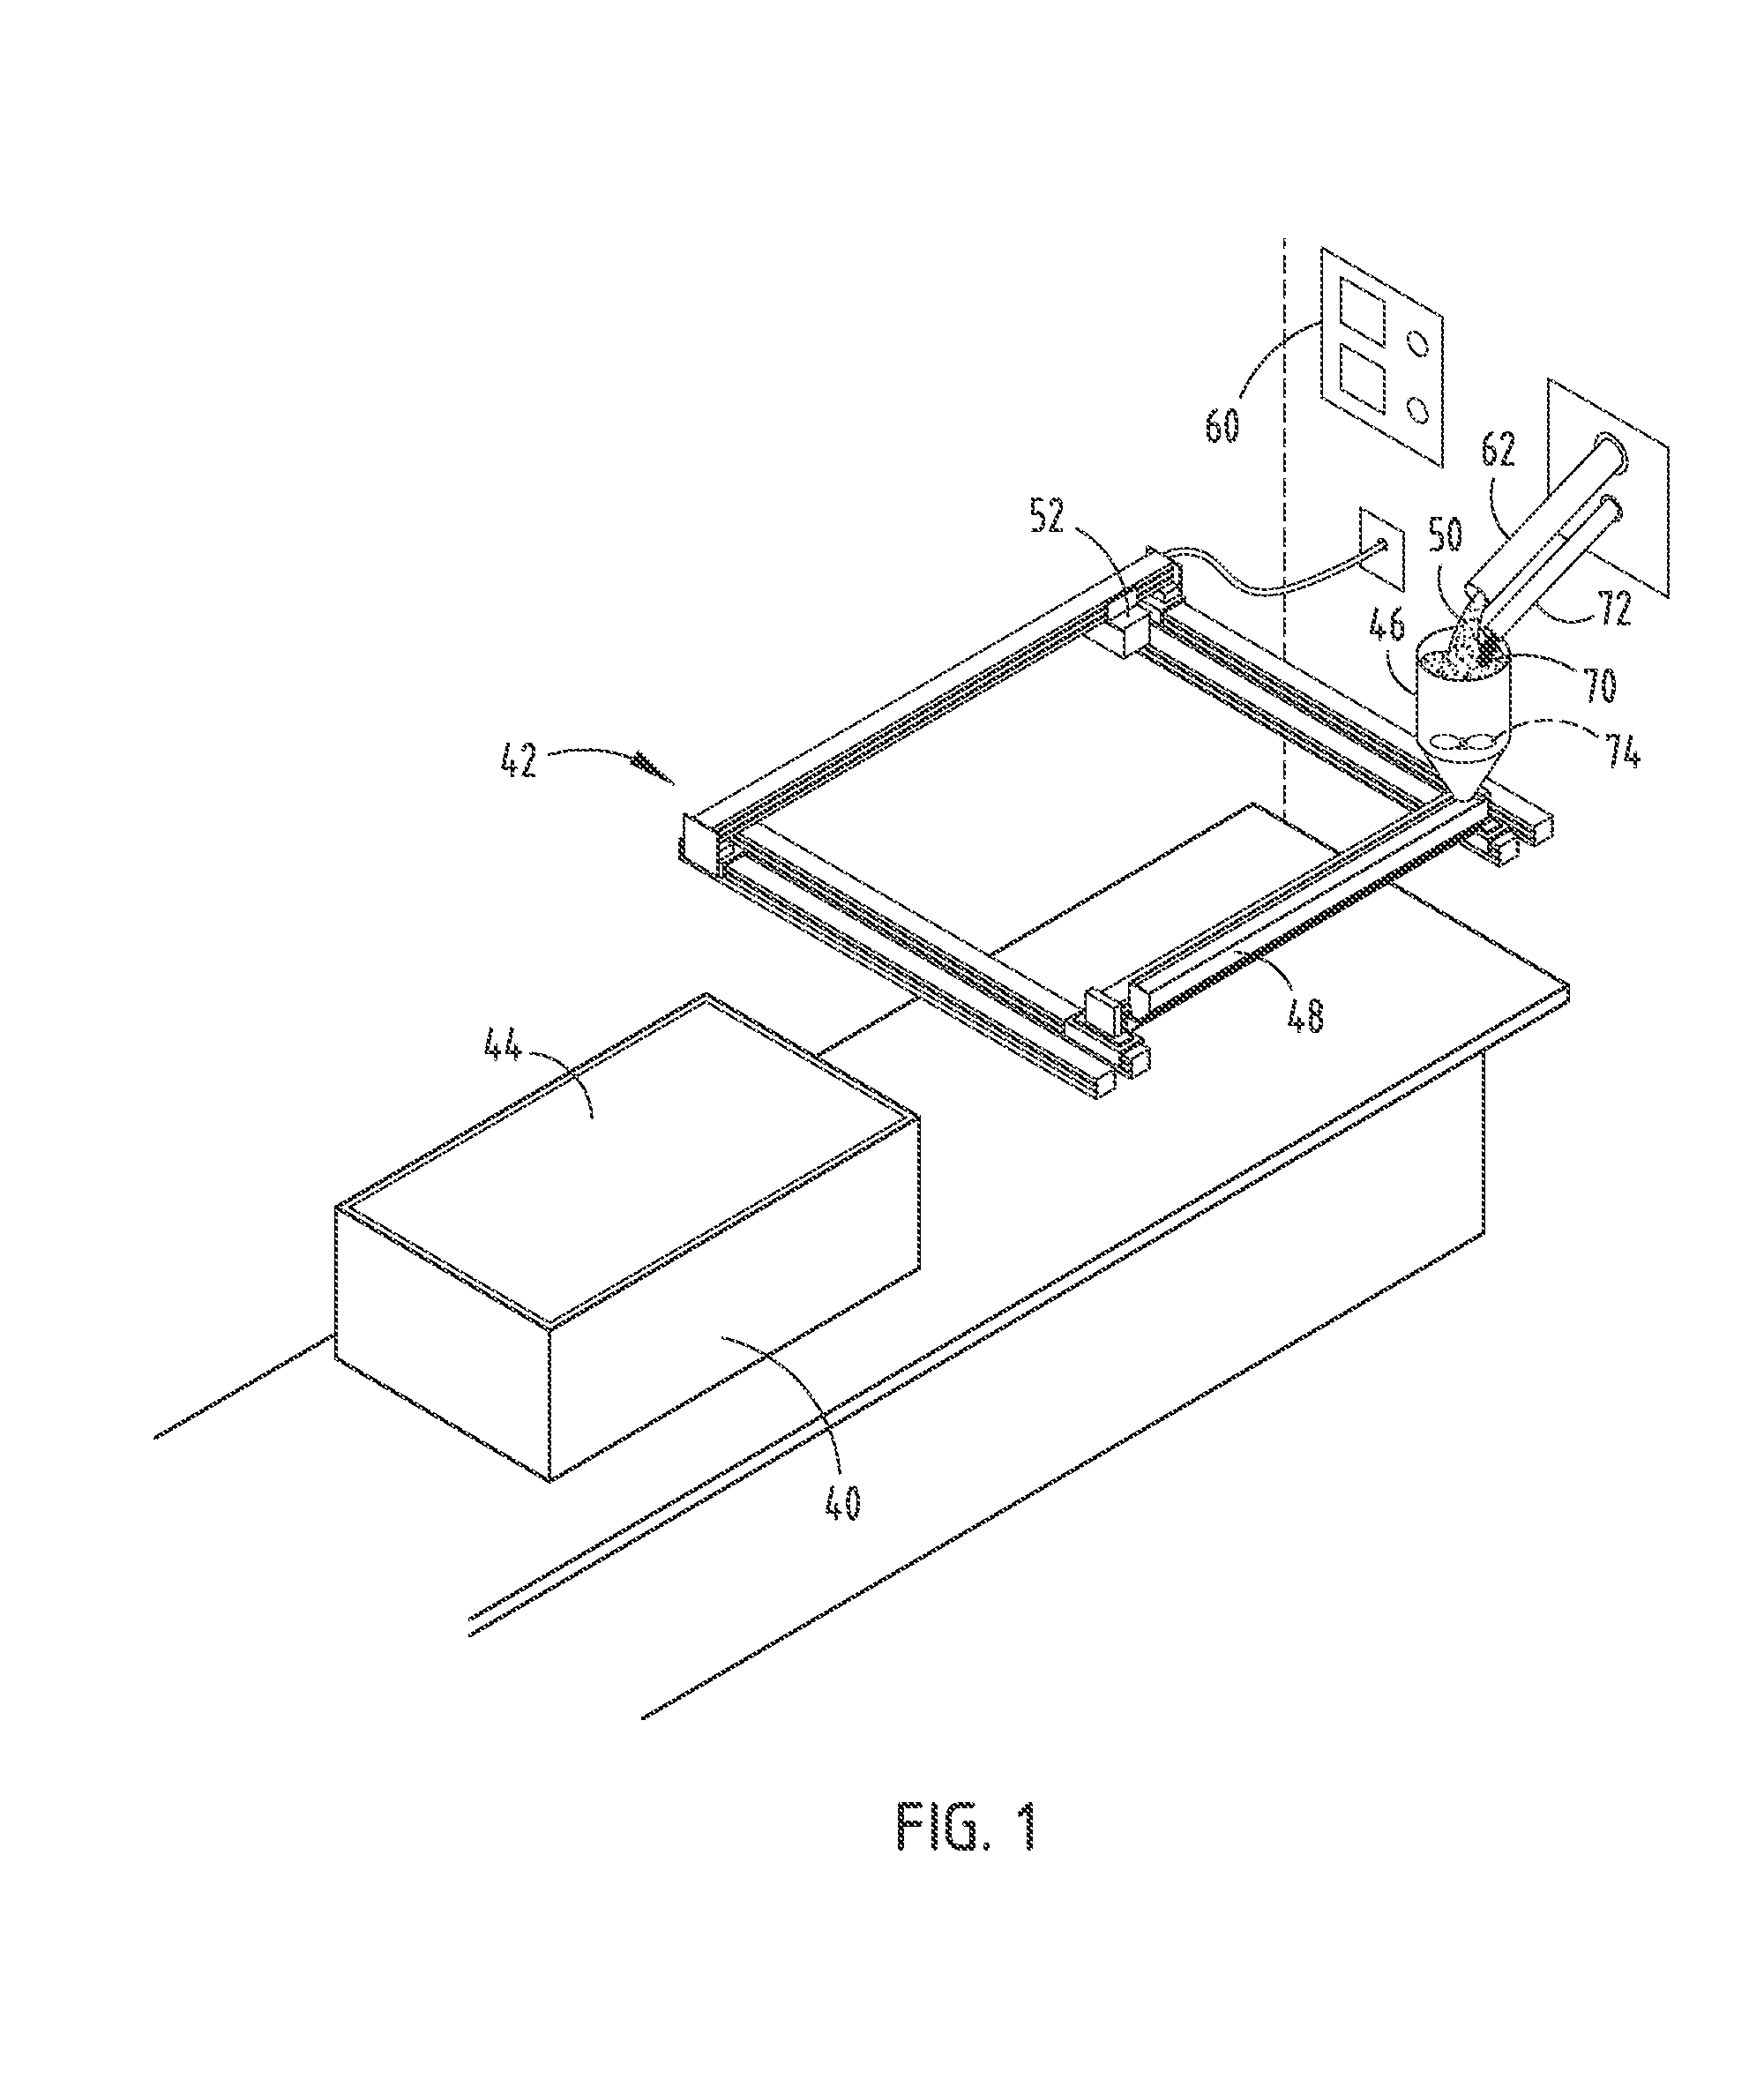 Molding assembly with heating and cooling system